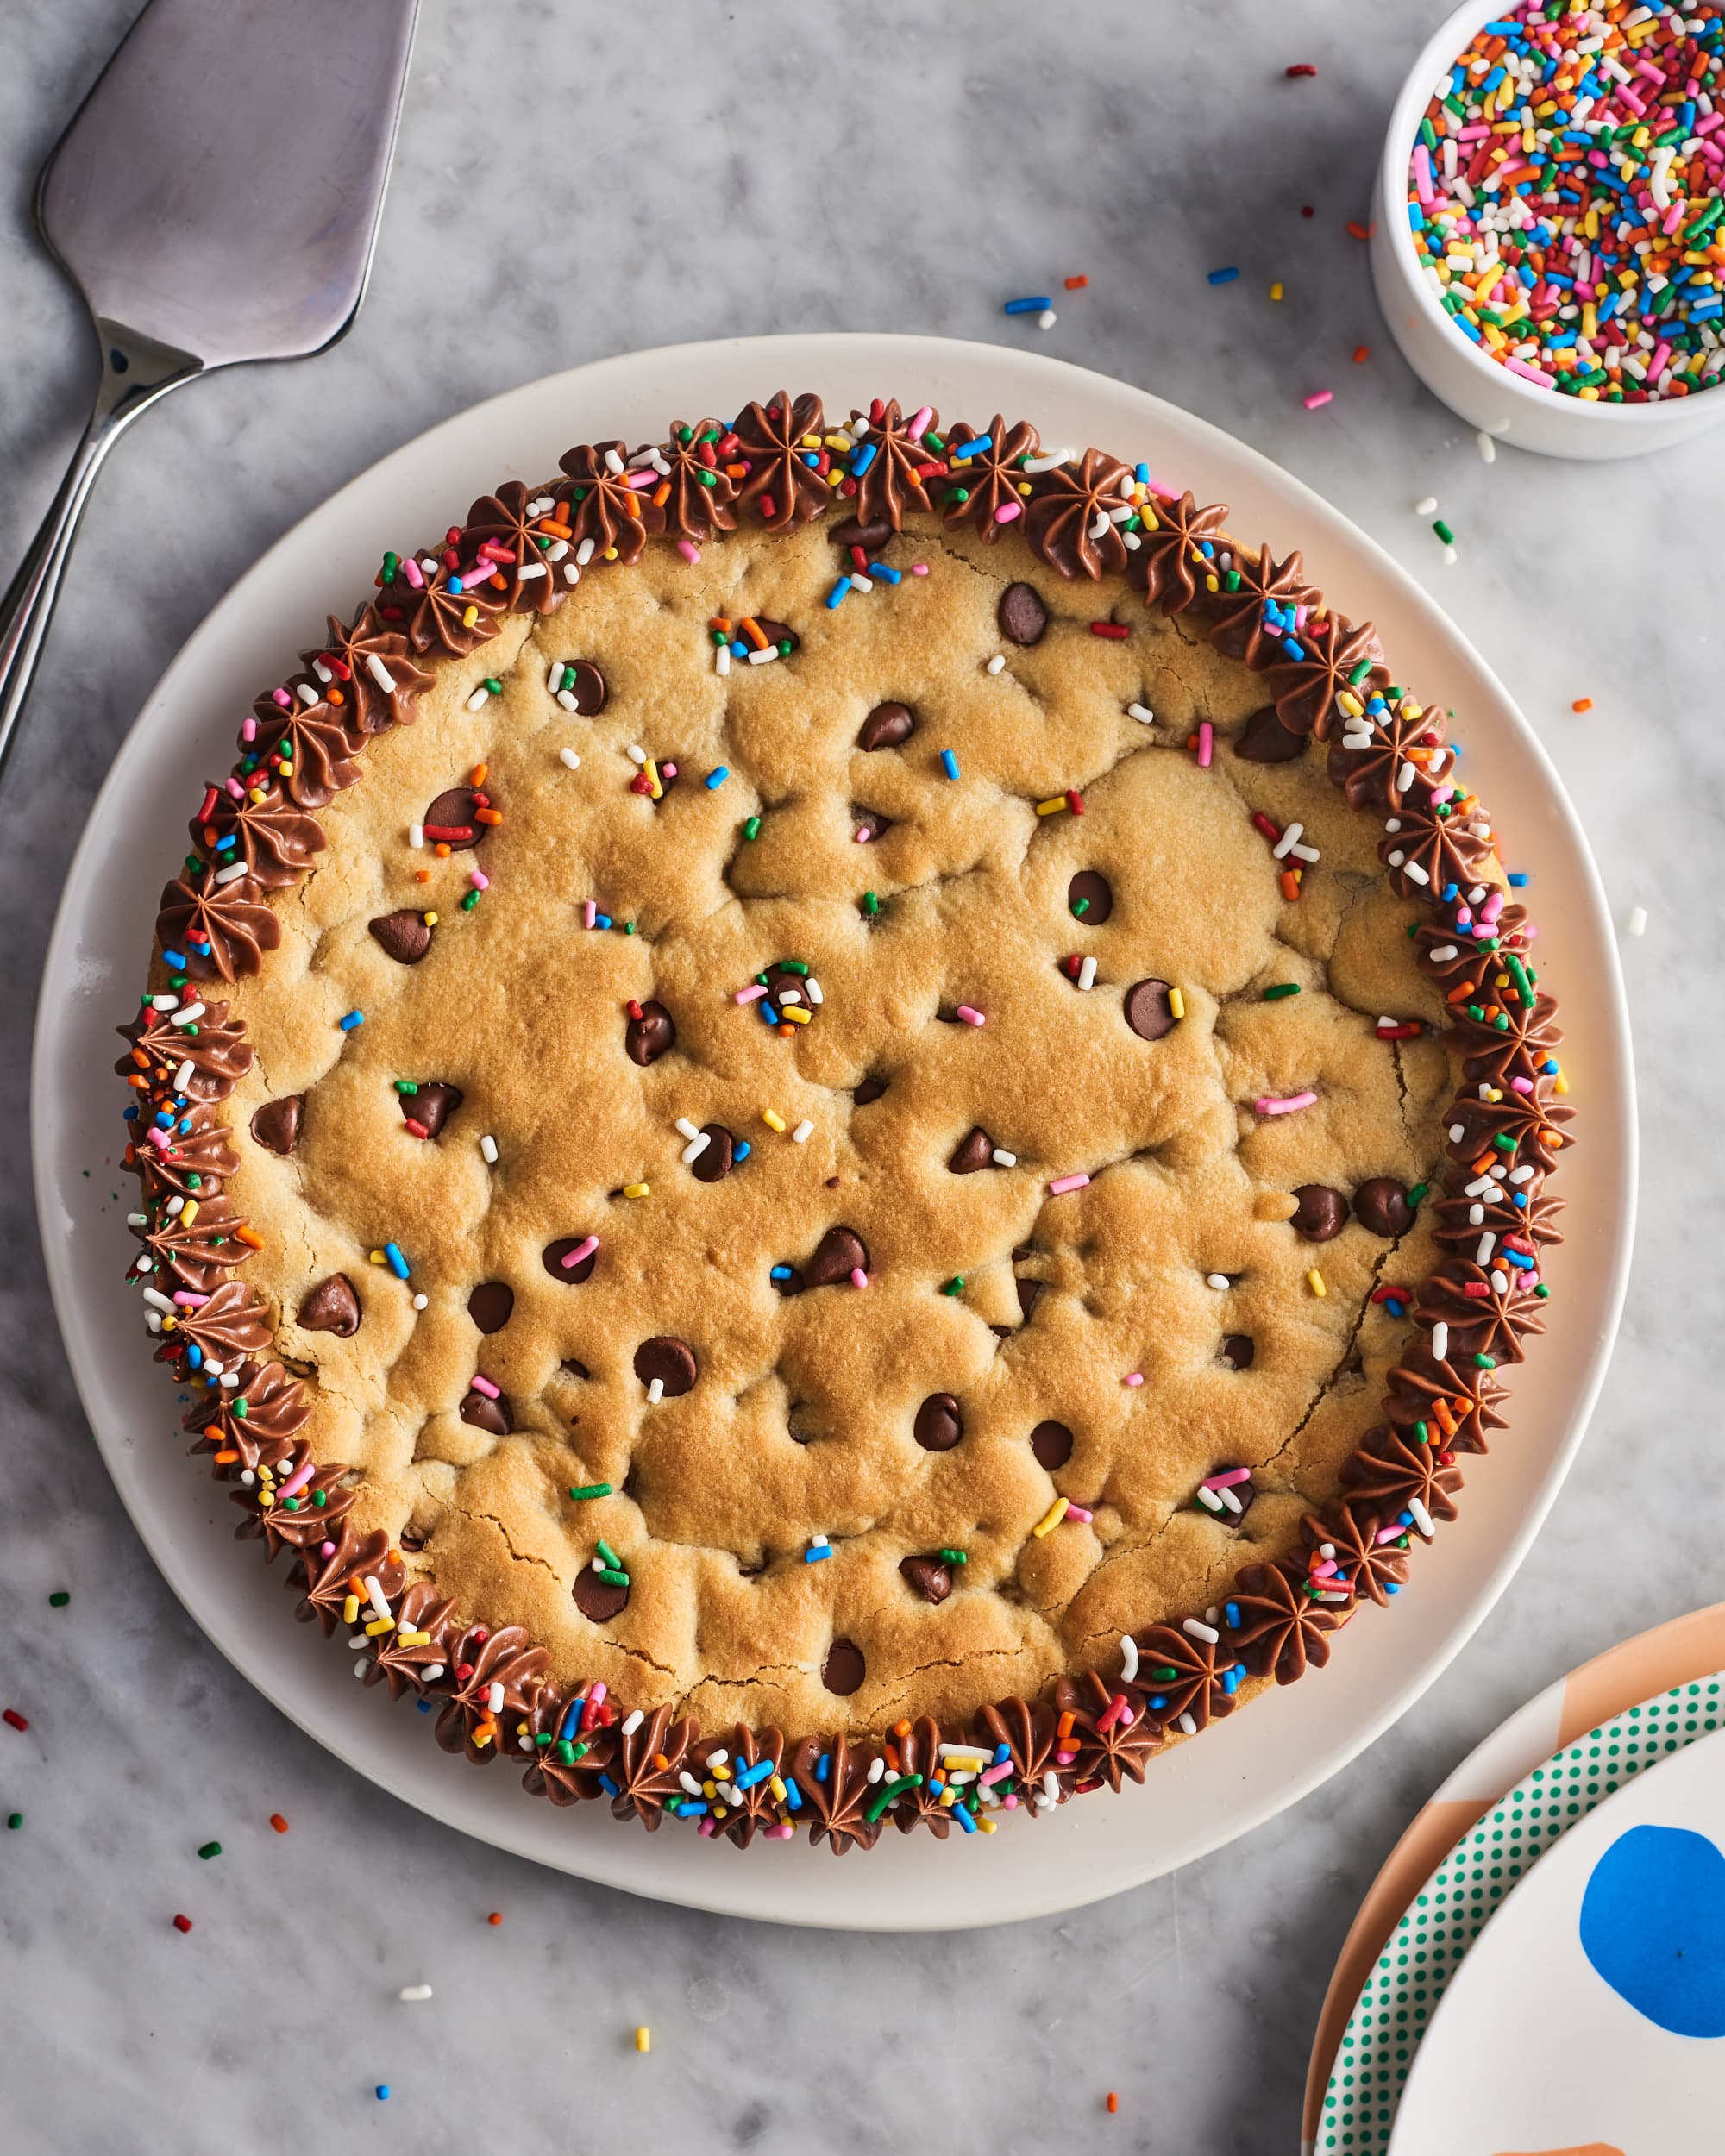 Delicious Cookie Cake Recipe Ideas to Satisfy Your Sweet Tooth